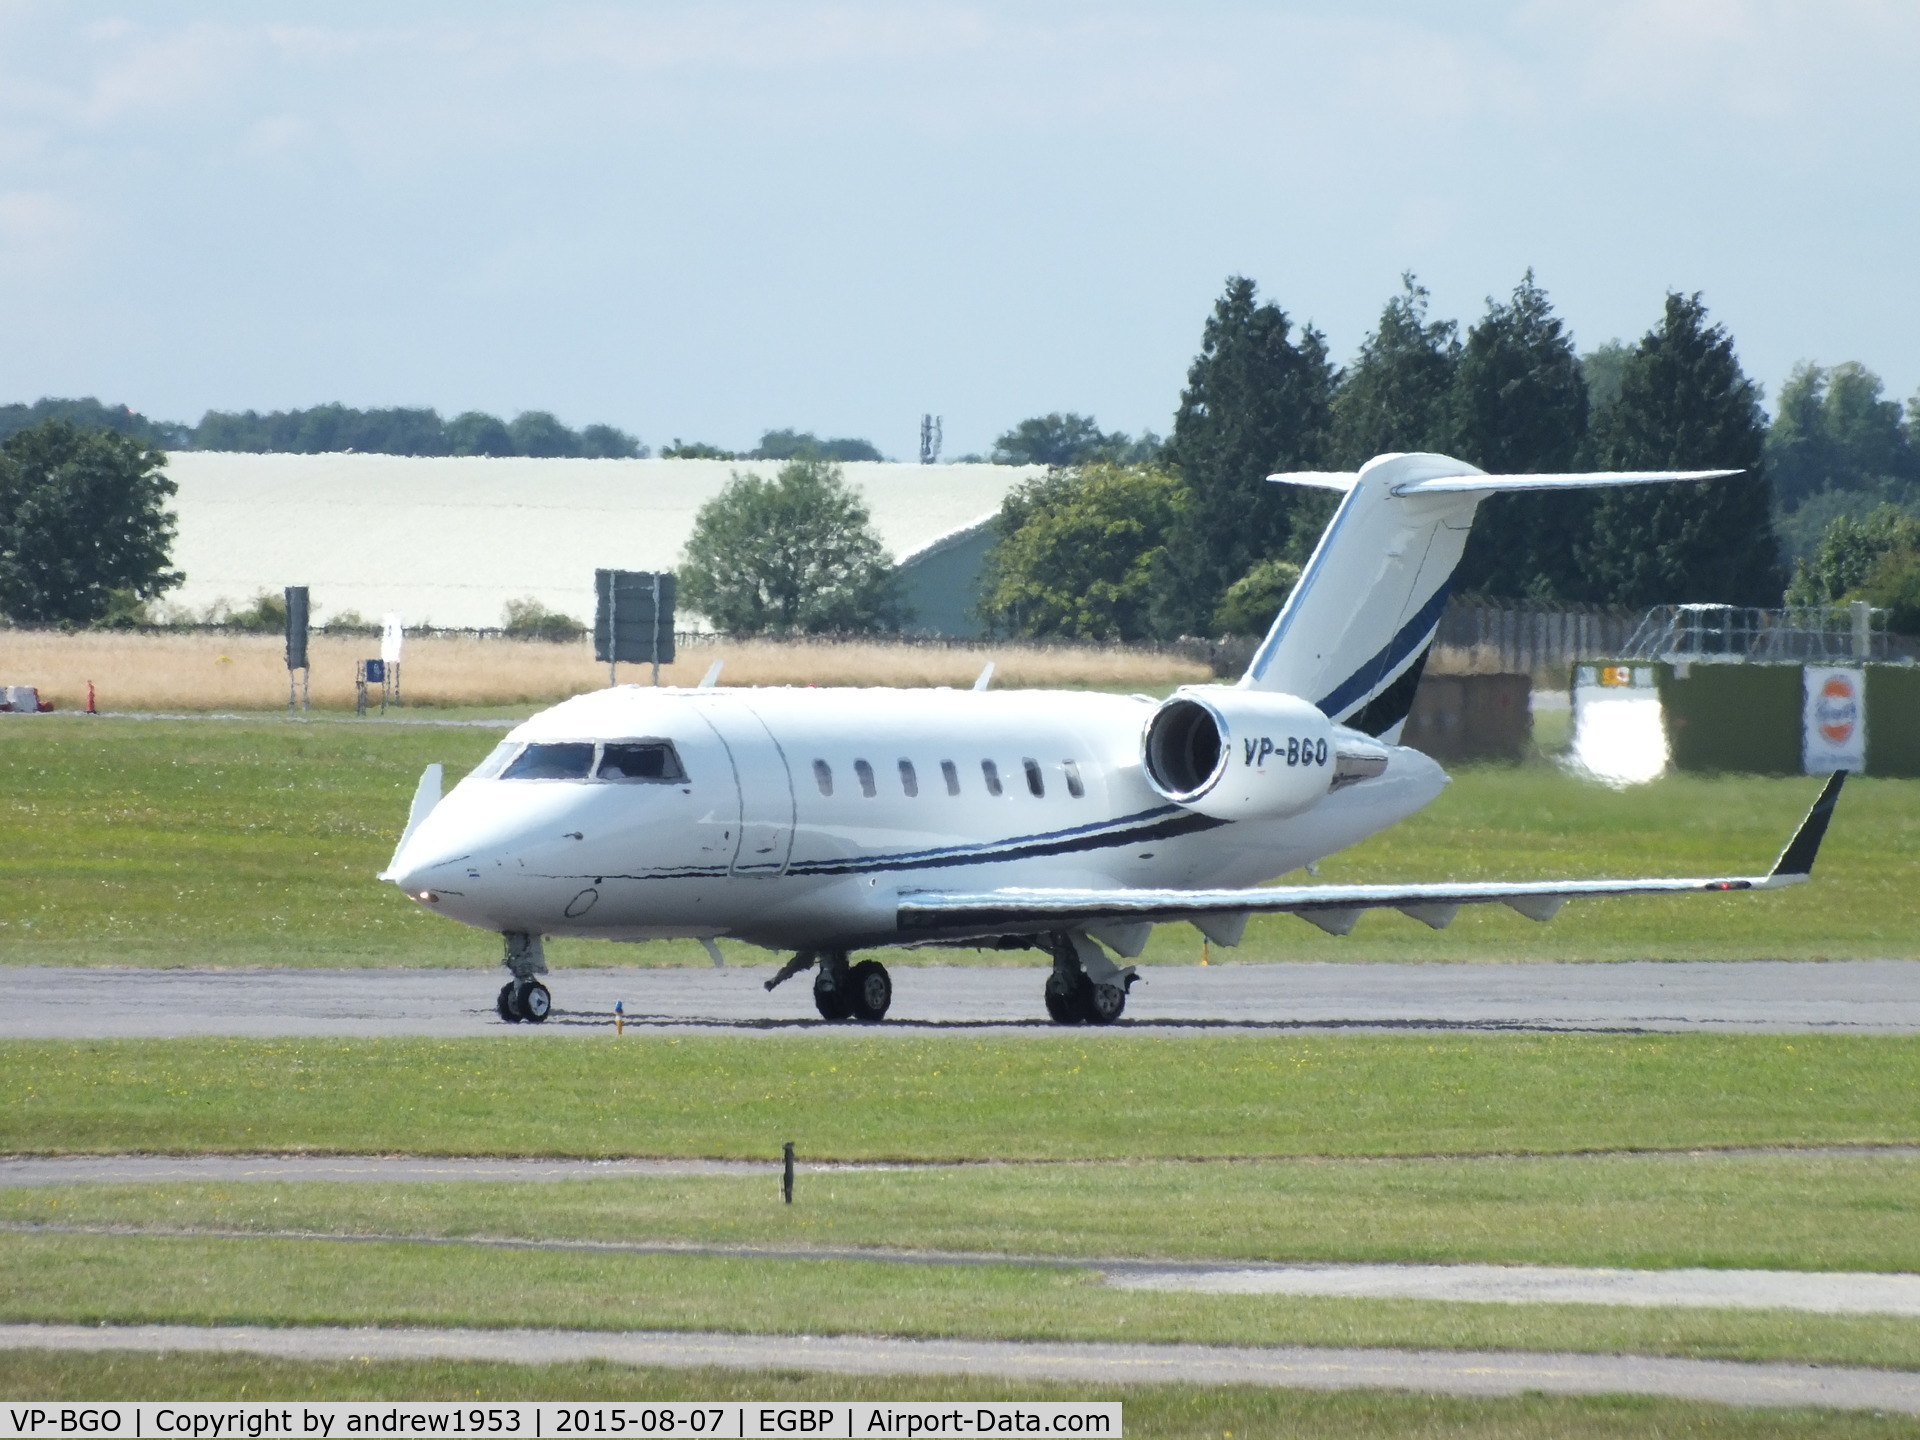 VP-BGO, 2010 Bombardier Challenger 605 (CL-600-2B16) C/N 5851, VP-BGO at Cotswold Airport.